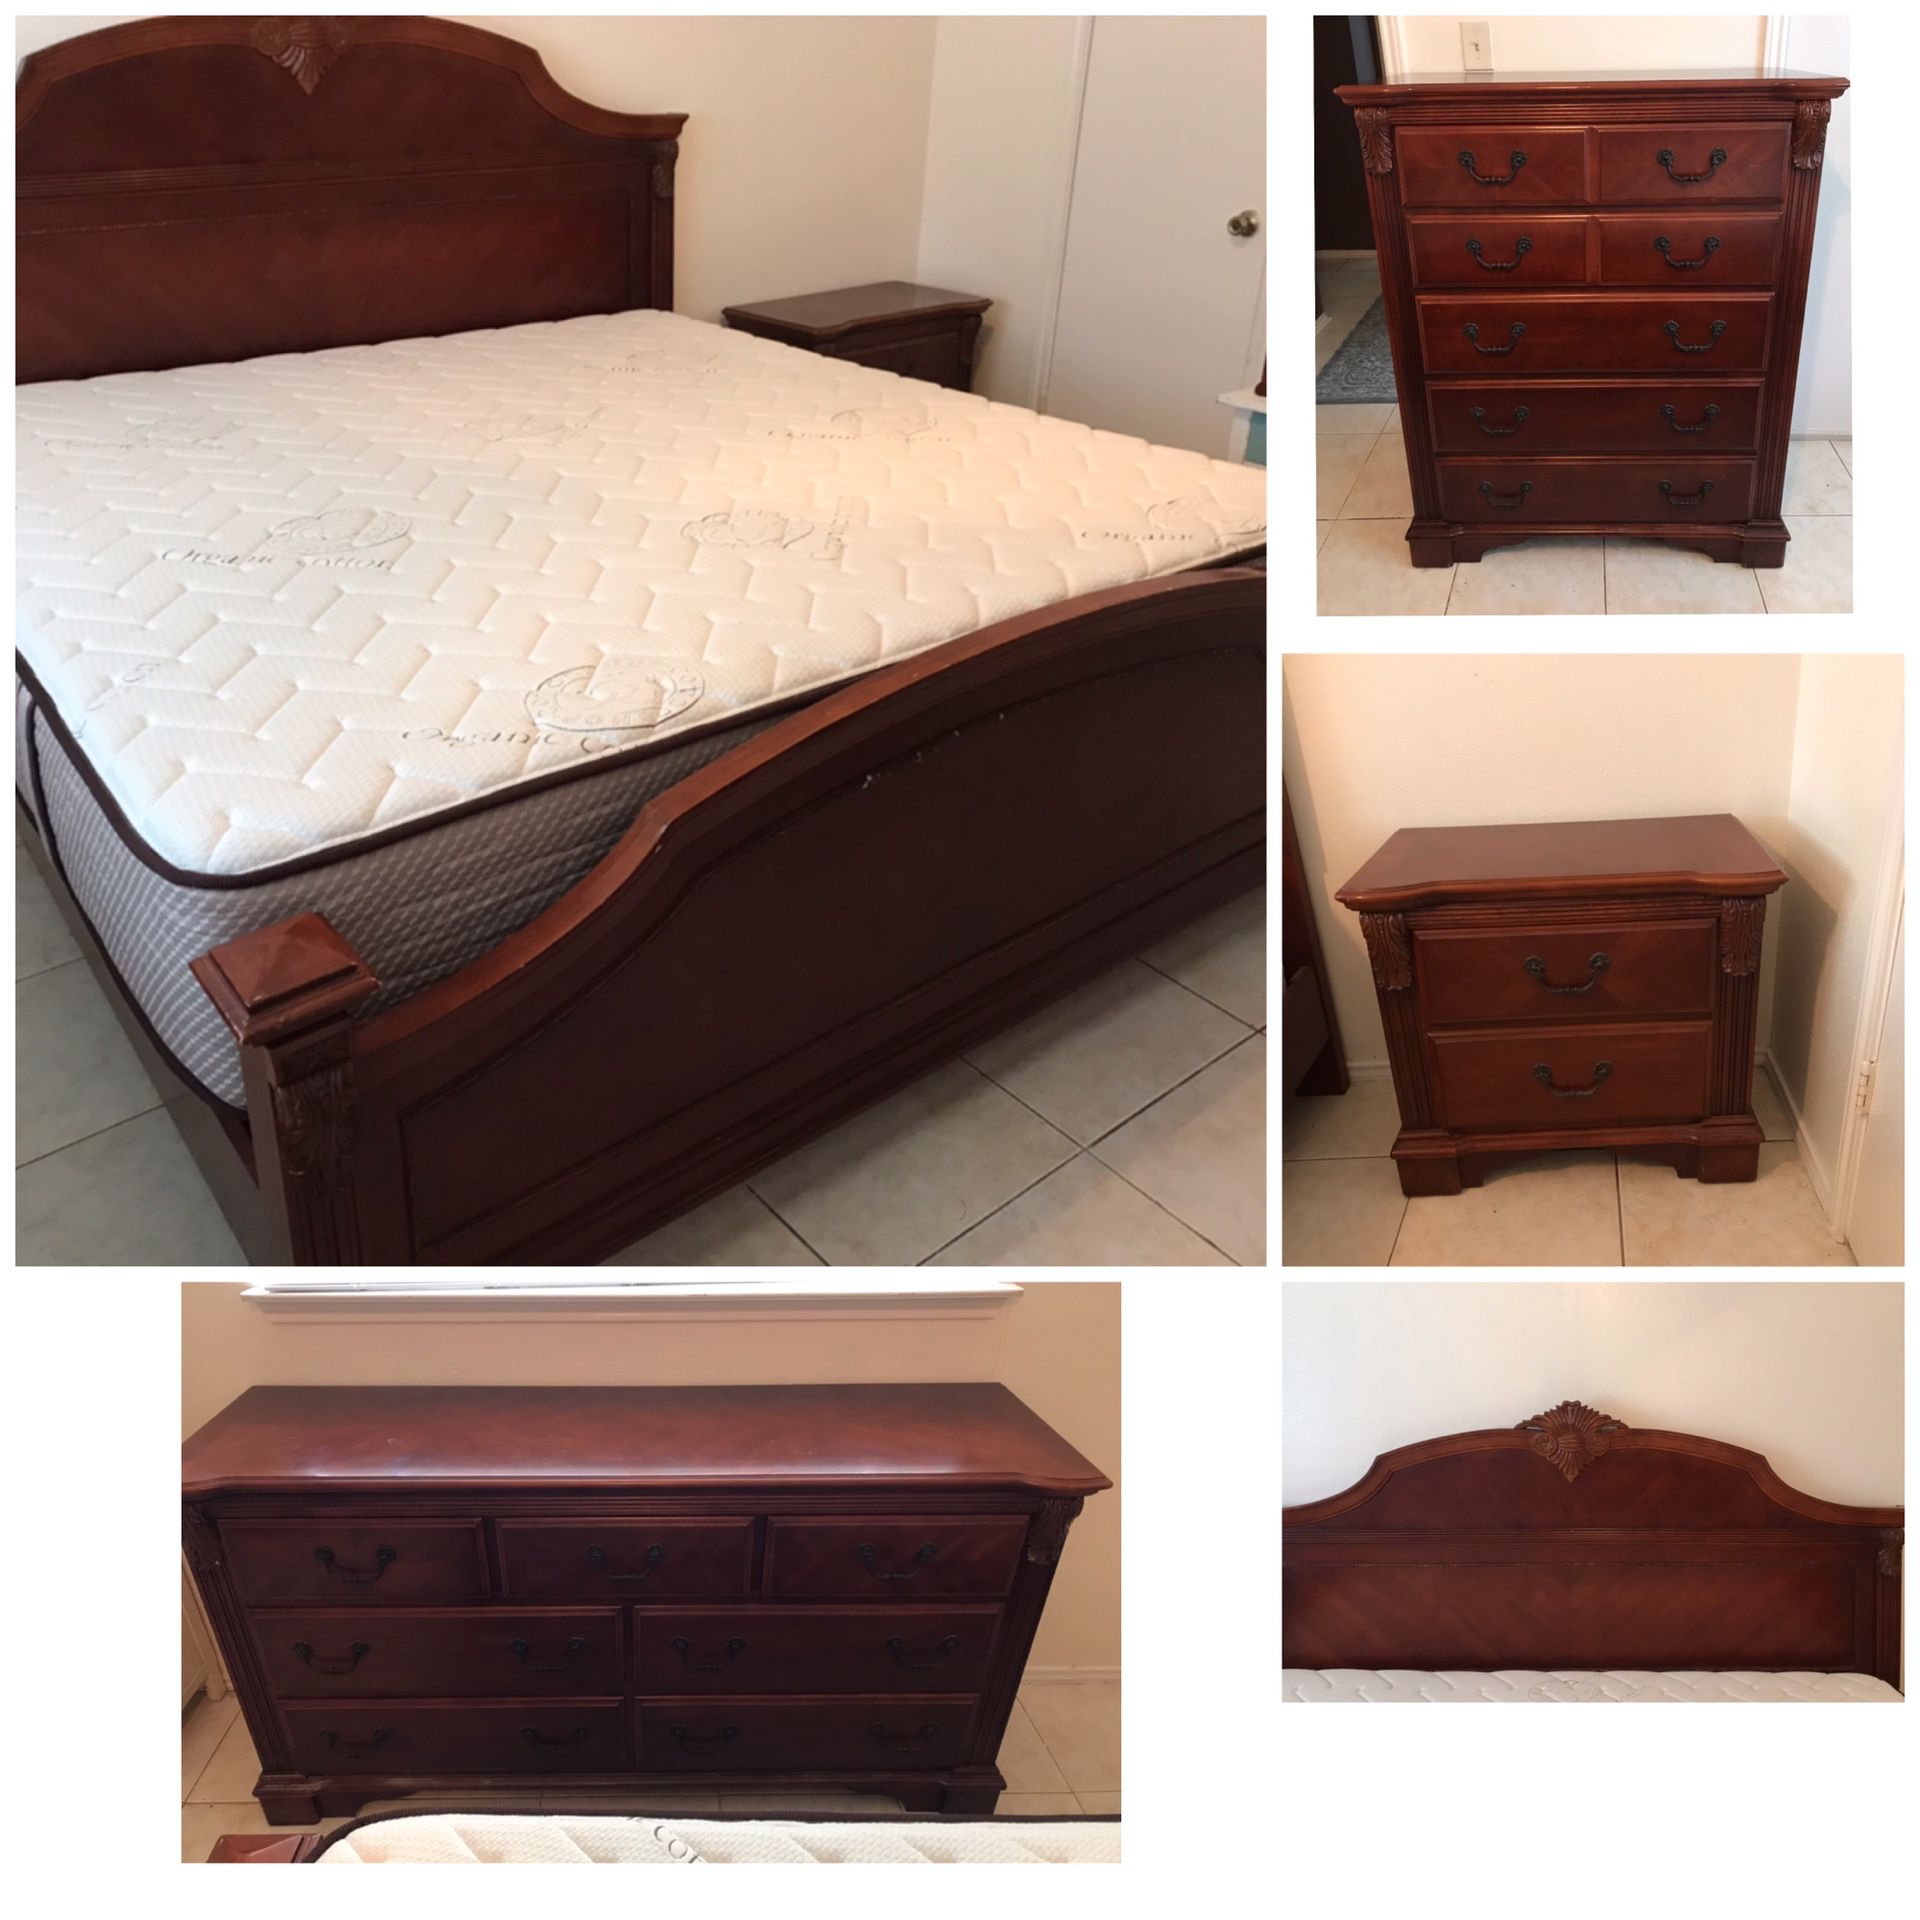 King Size Bedroom Set Long Dresser w/mirror, tall dresser, night stand , box springs DOES NOT INCLUDE MATTRESS!